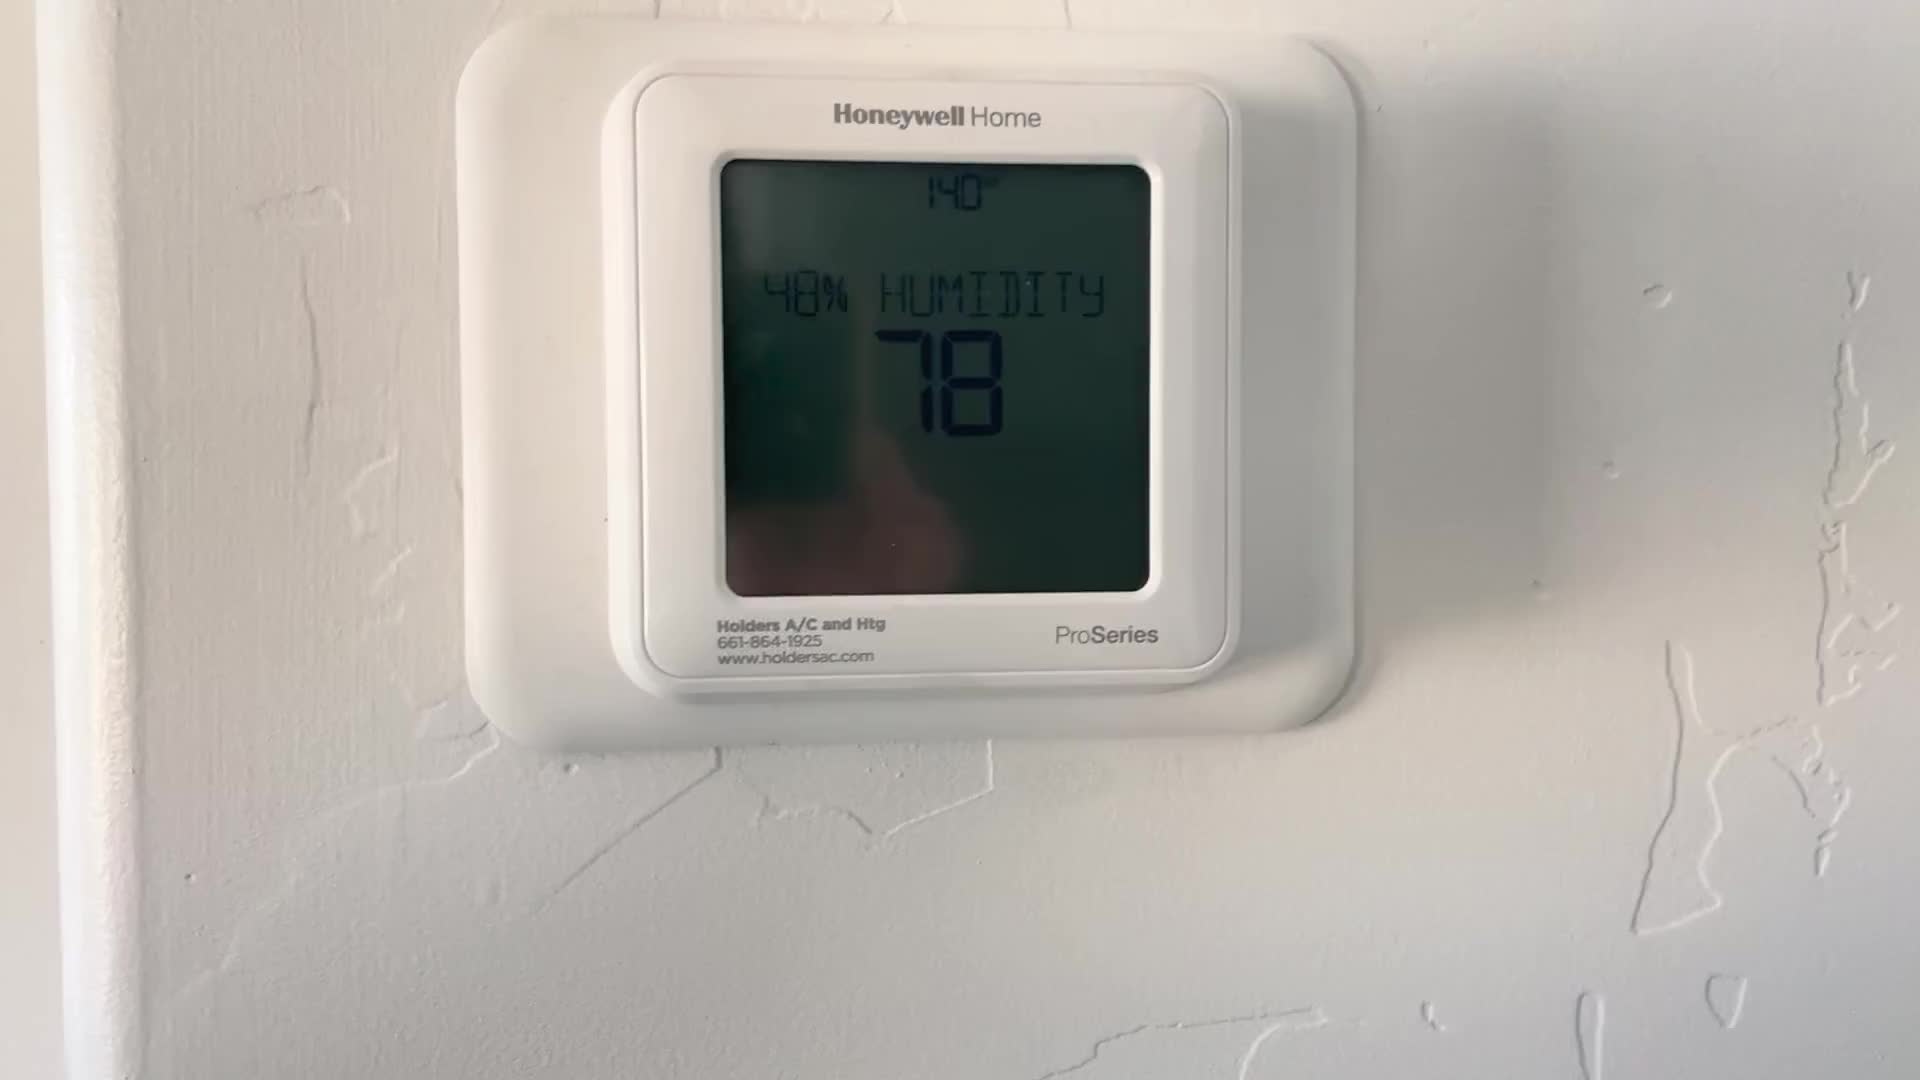 How To Use A Honeywell Home Thermostat